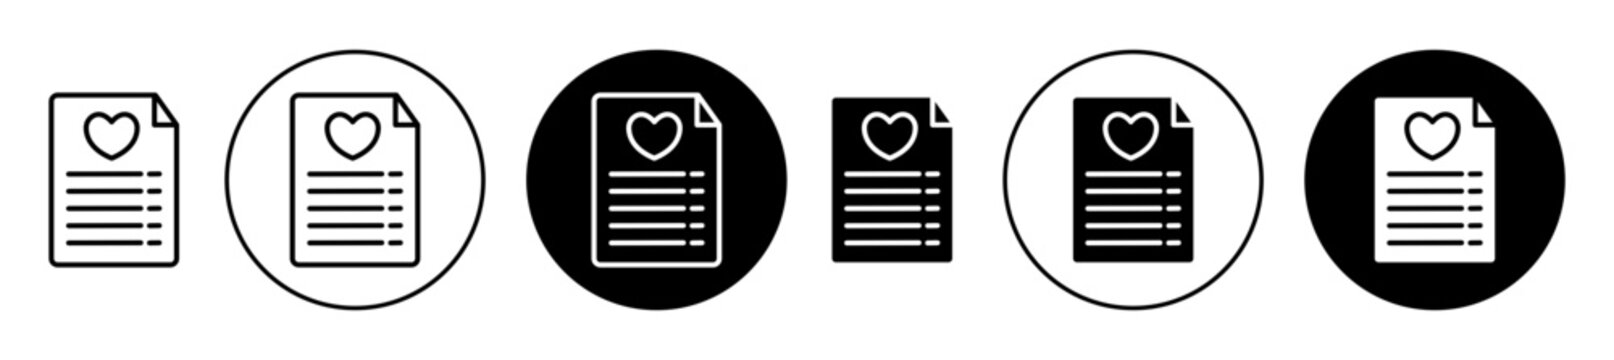 Wish list vector icon set in black color. Suitable for apps and website UI designs